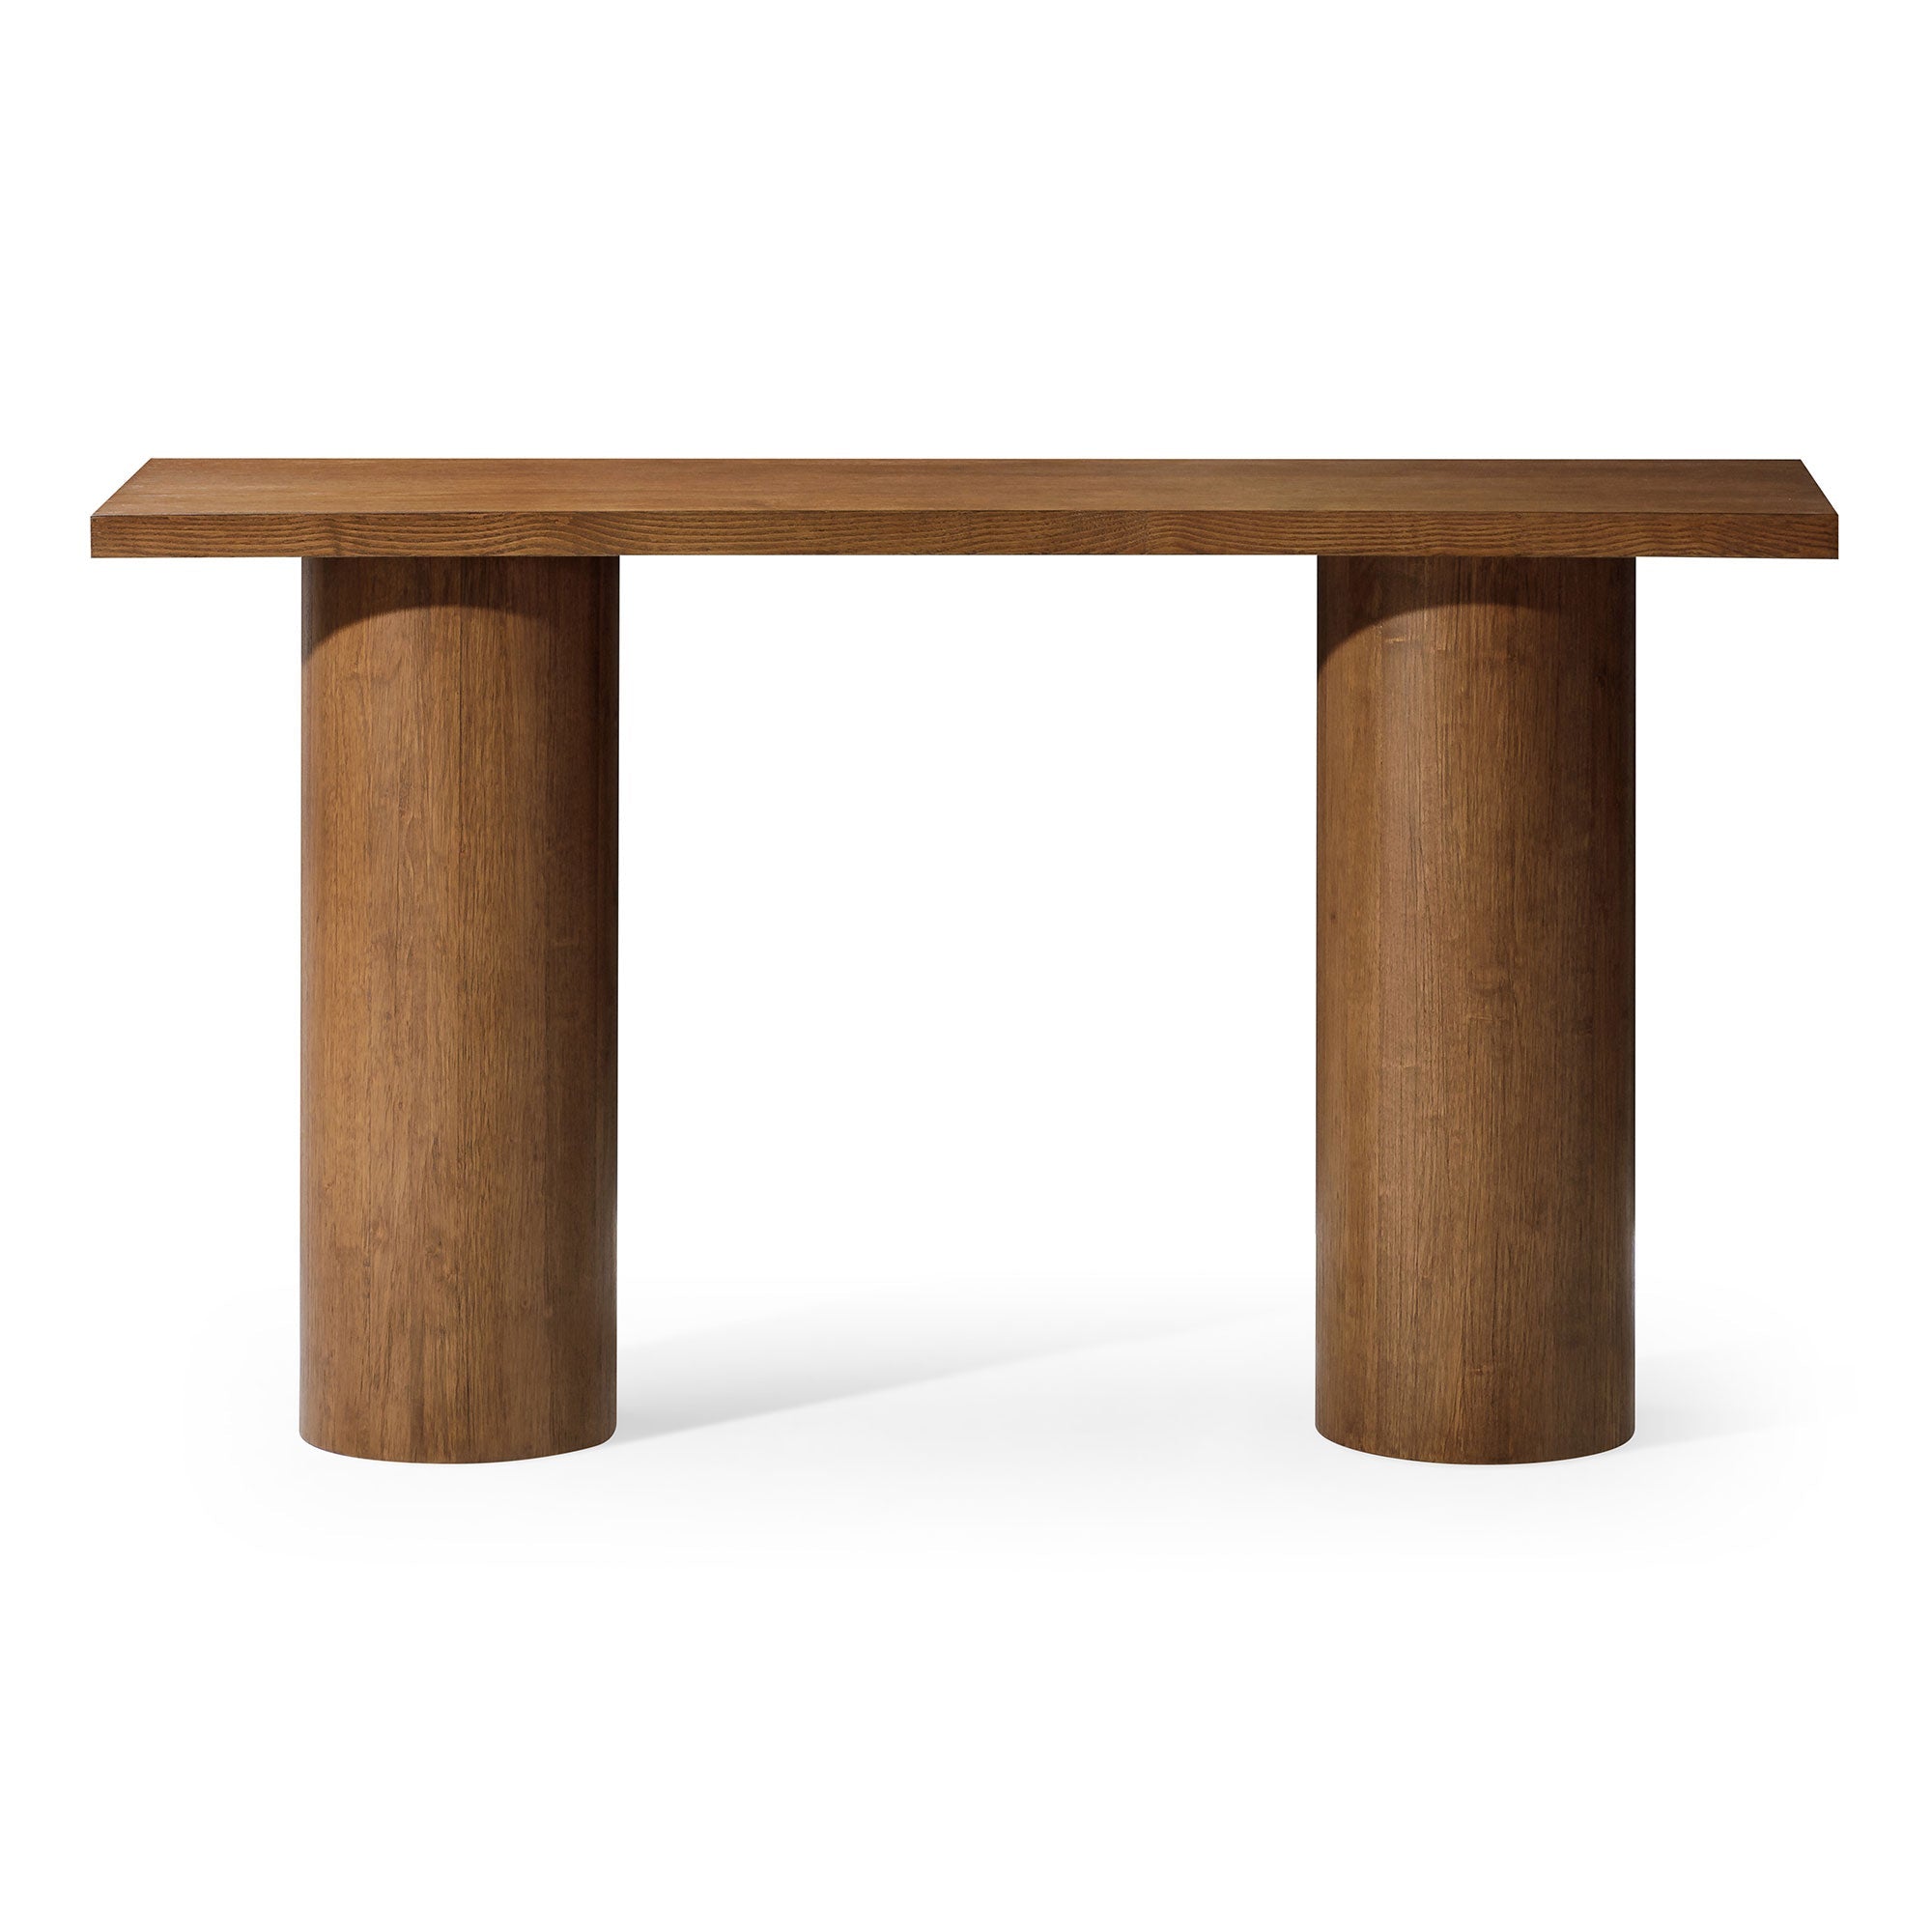 Lana Contemporary Wooden Console Table in Refined Brown Finish